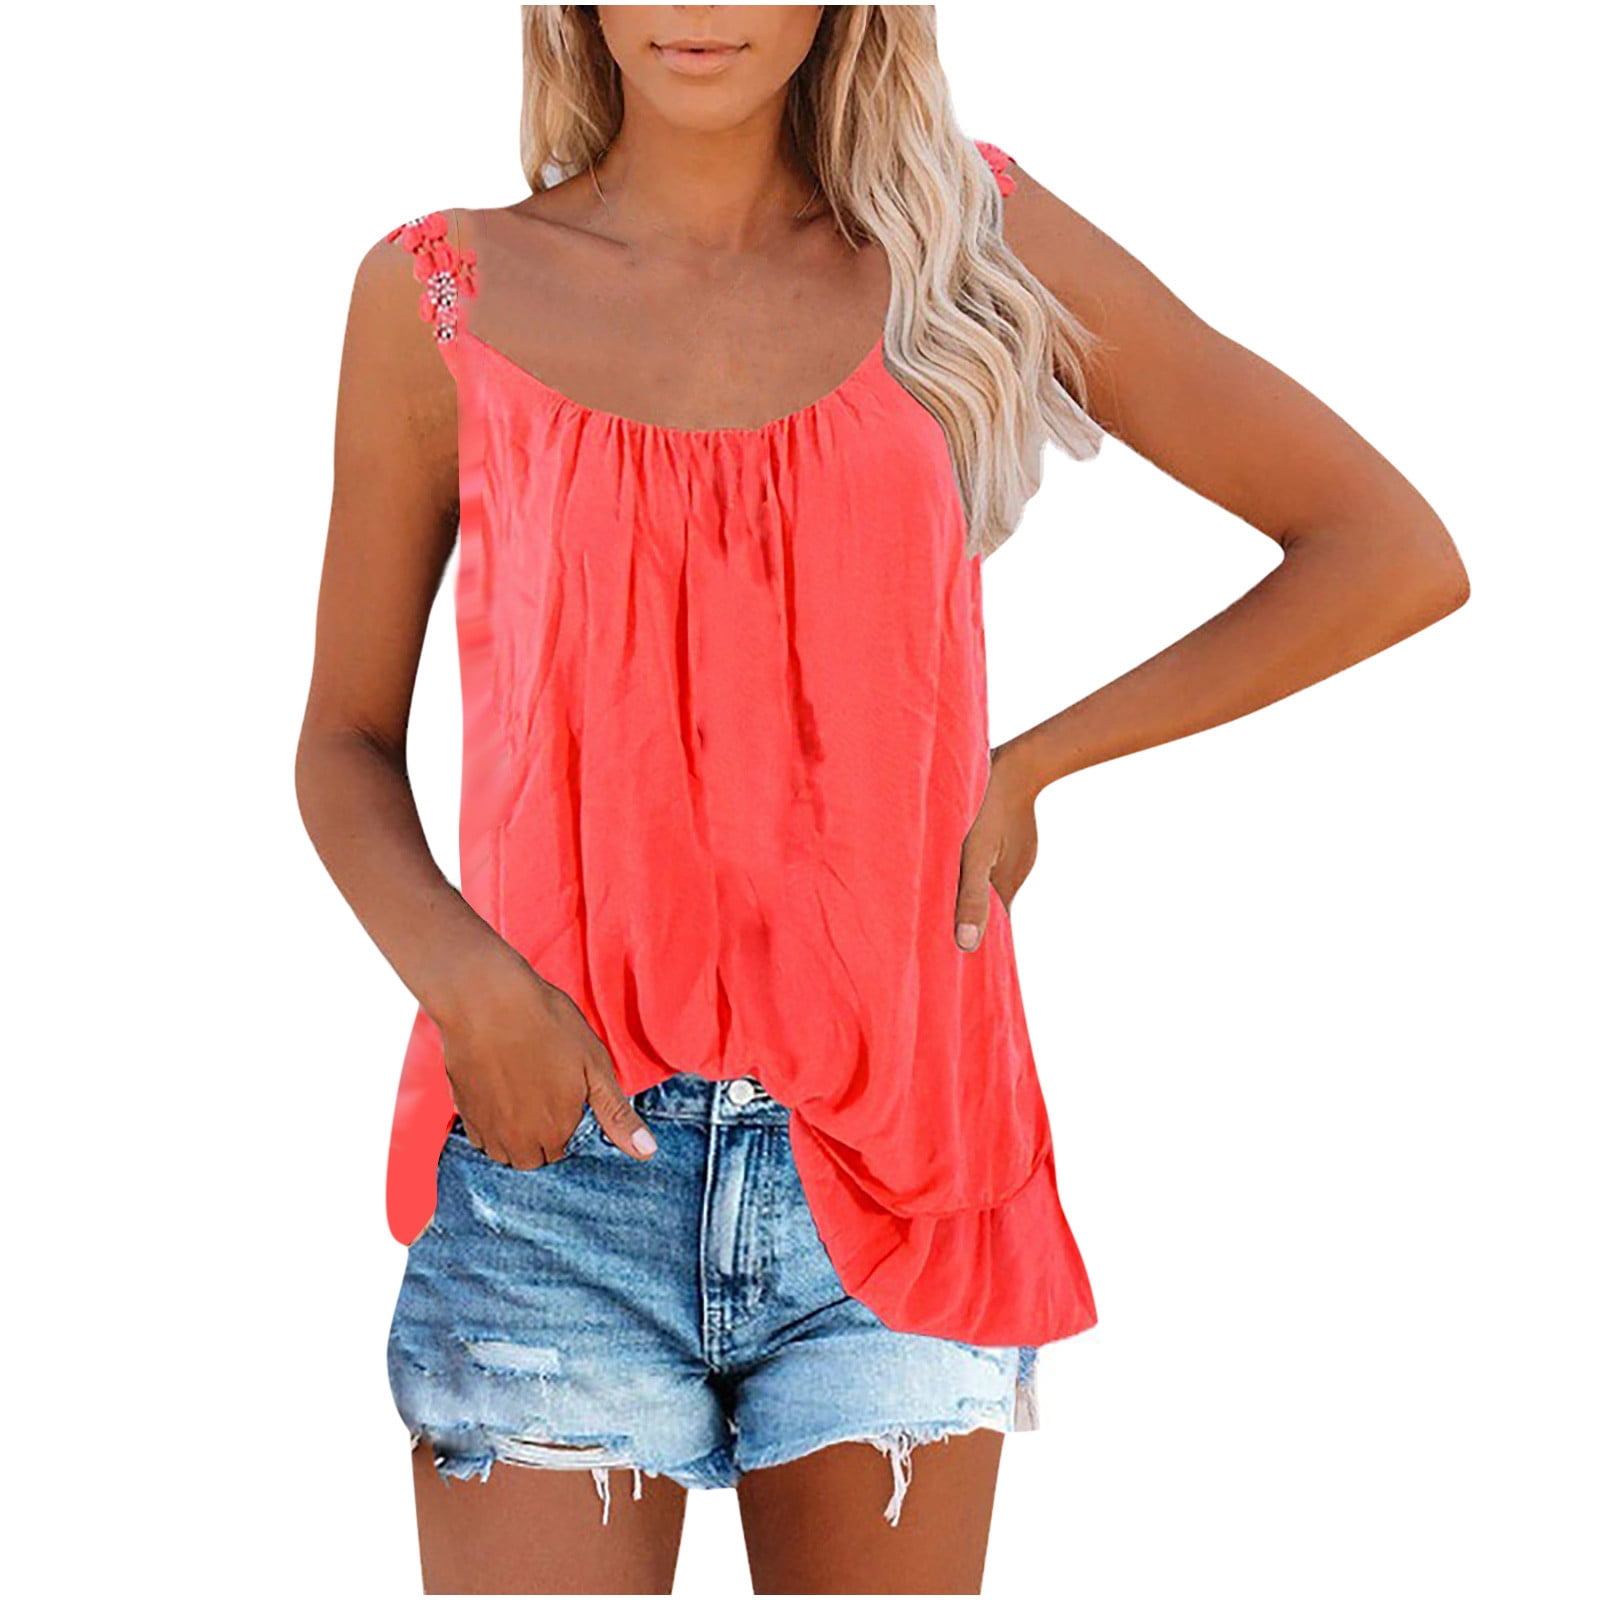 Scyoekwg Womens Tank Tops Summer Trendy Sleeveless Casual Relaxed Fit  Shirts Solid Color Tees Shirt Round Neck Lace Strap Double Panel Top Tops  Blouse